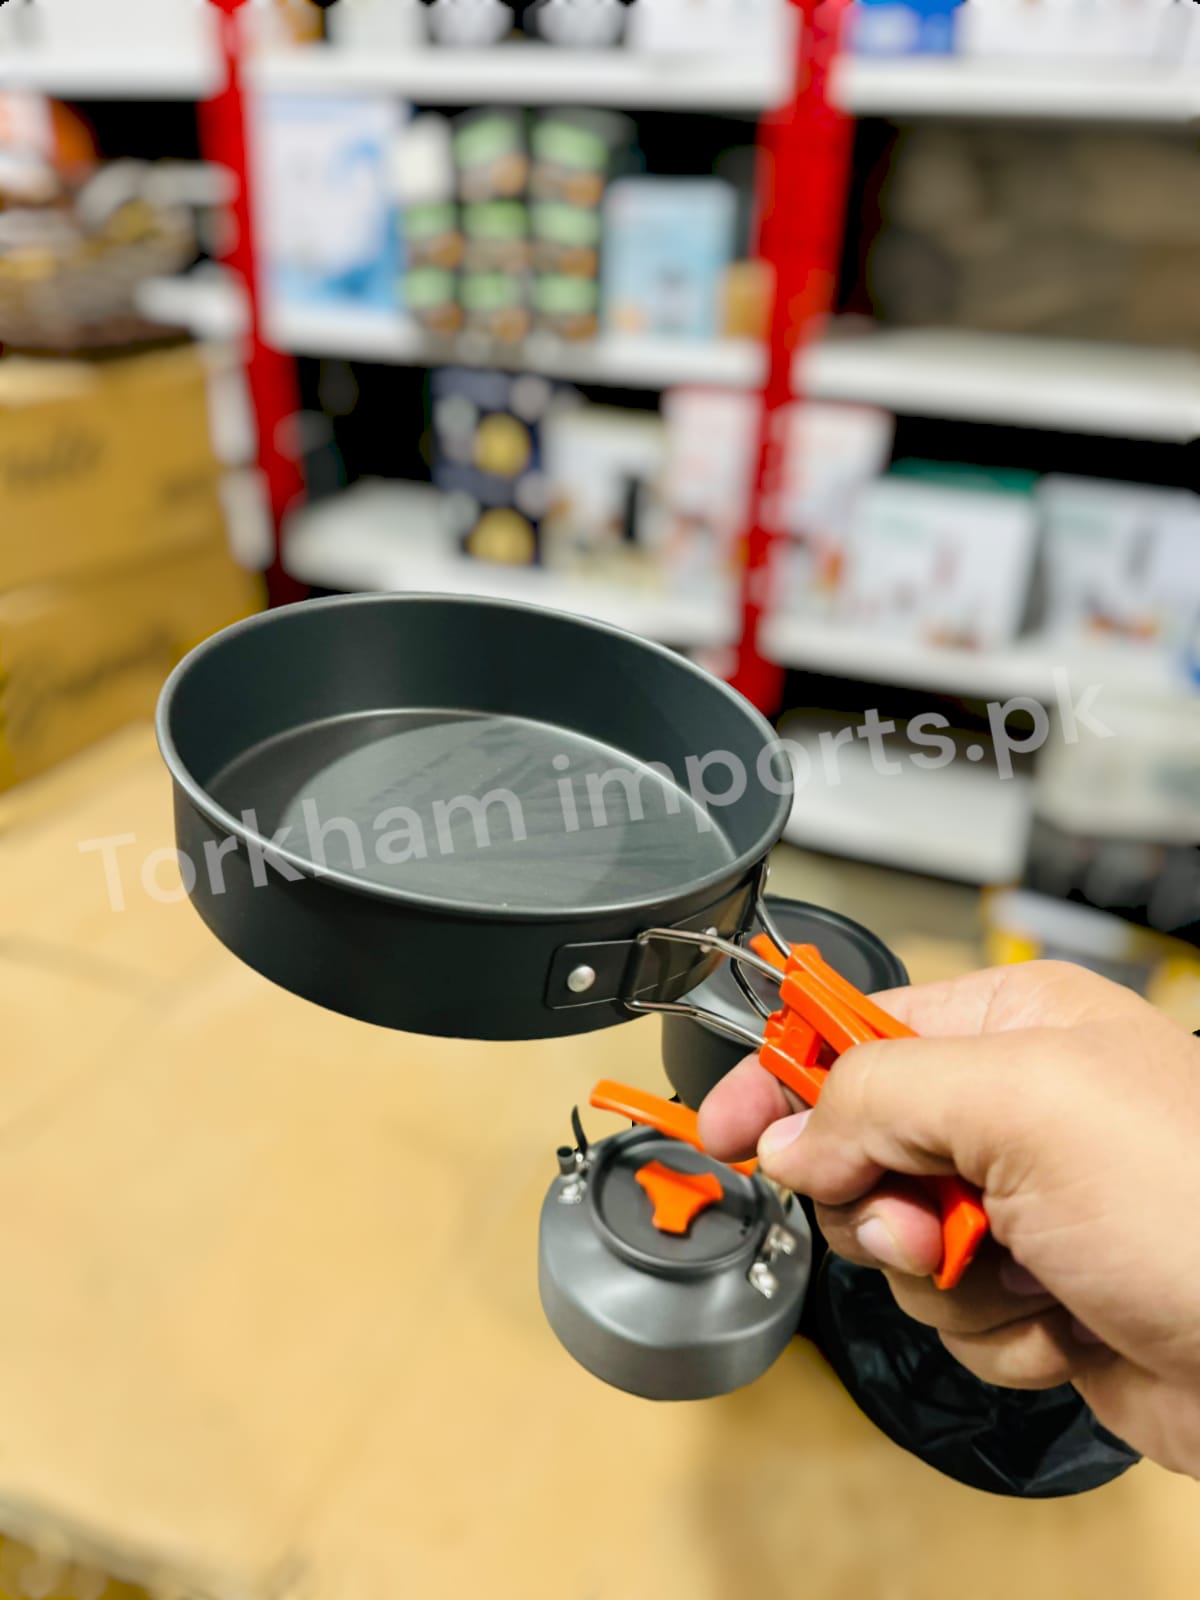 Camping Foldable Cooking Set